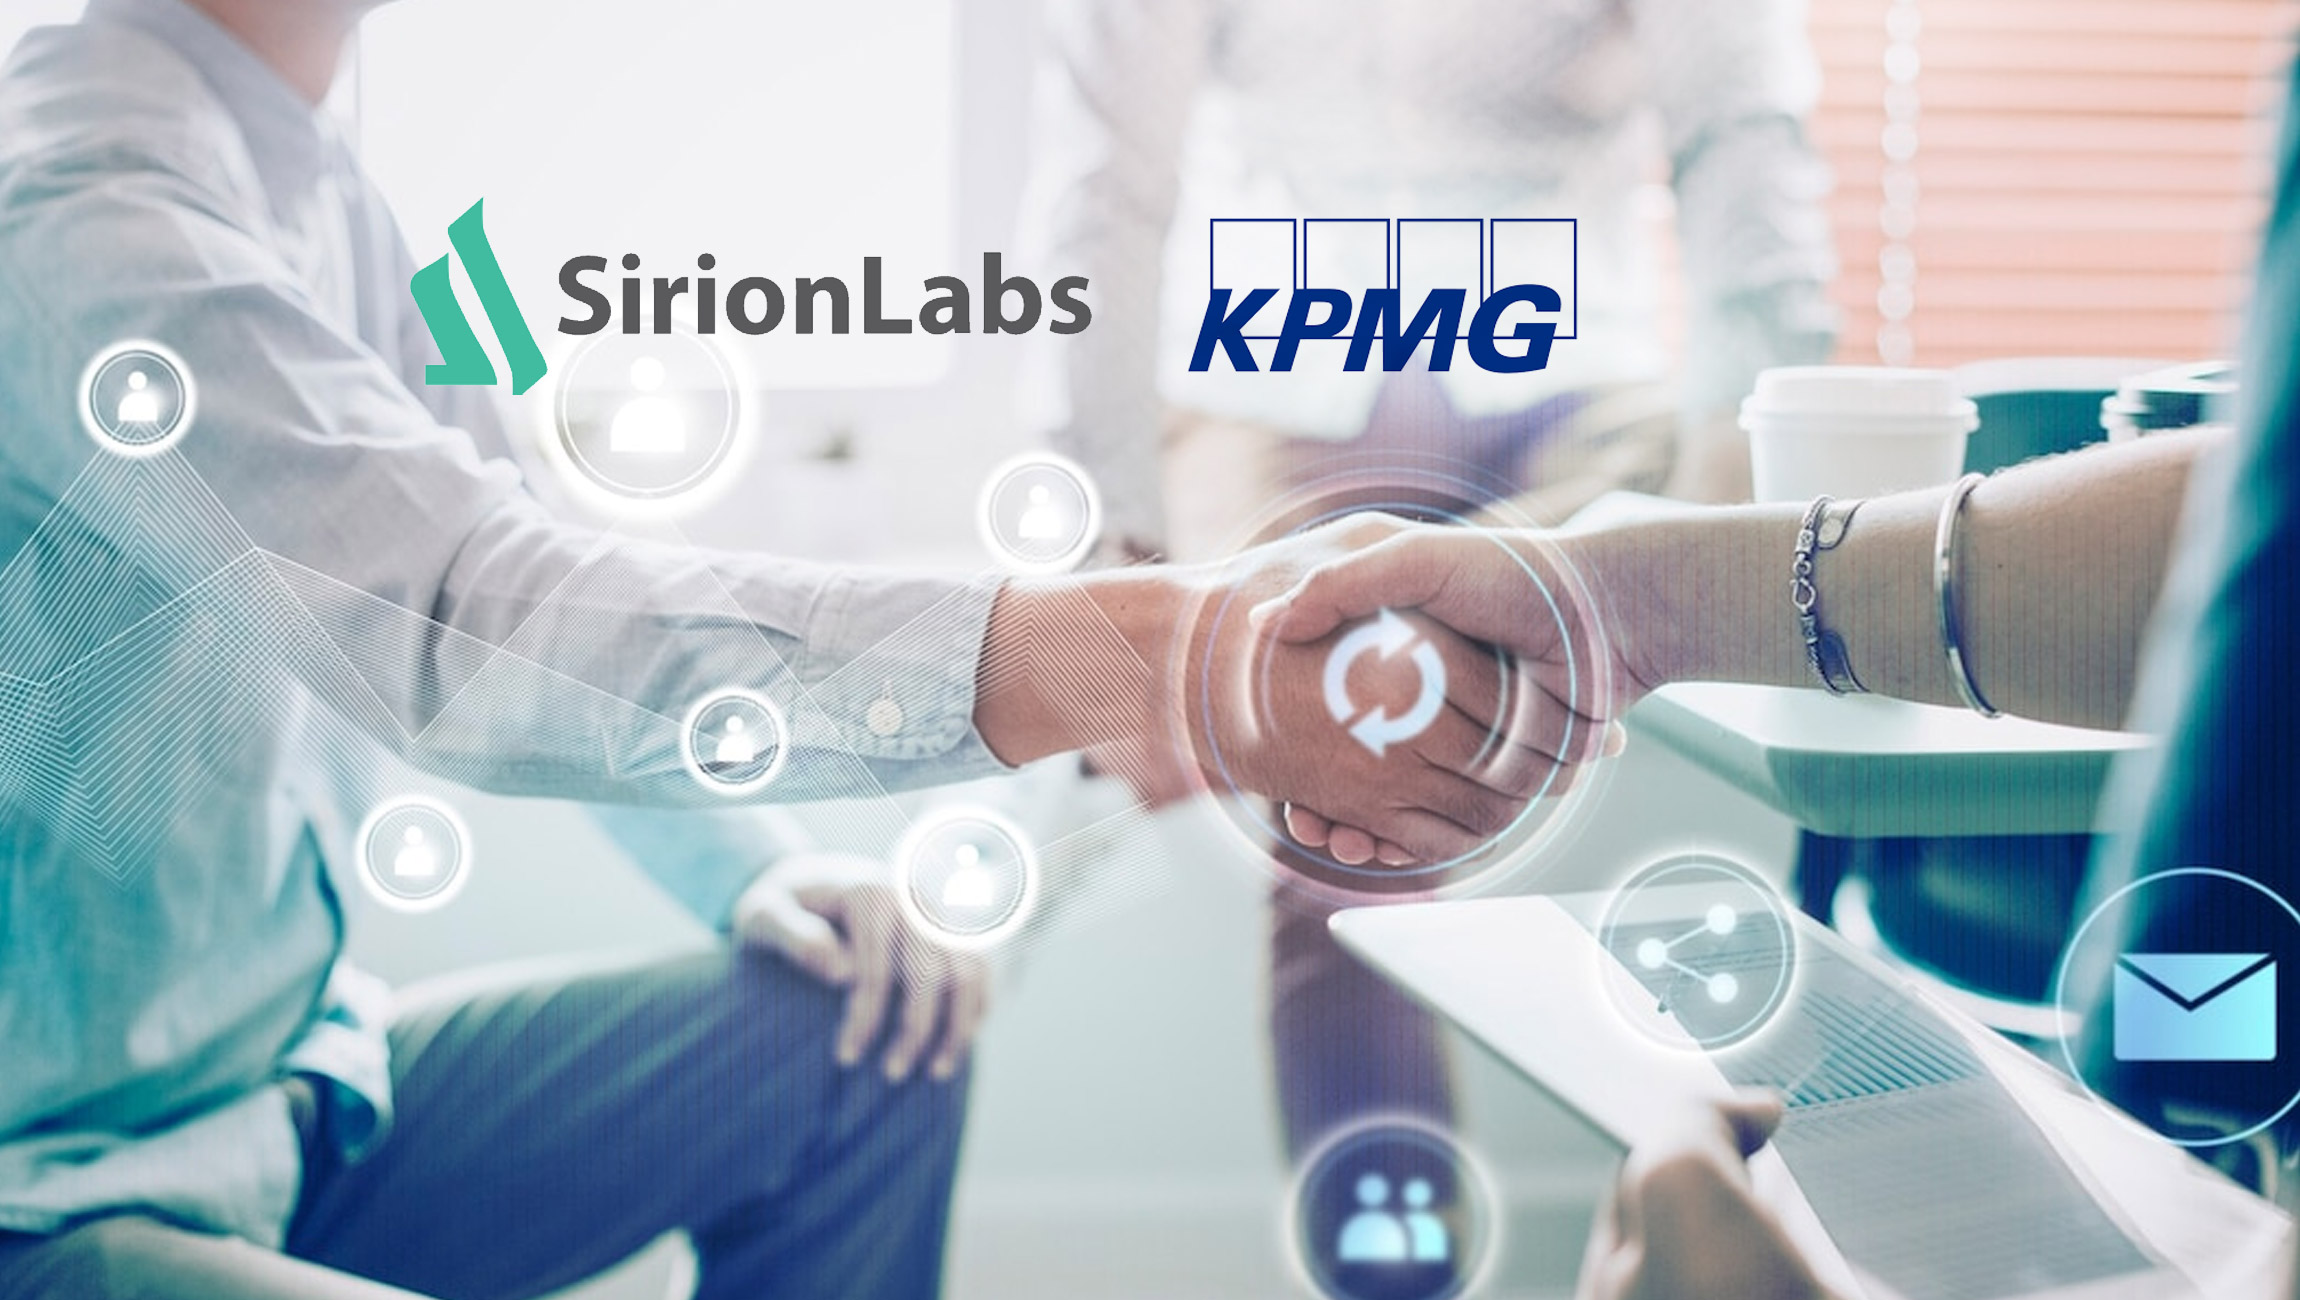 SirionLabs Announces Expansion of Strategic Alliance With KPMG to Streamline Contract Management Processes Globally